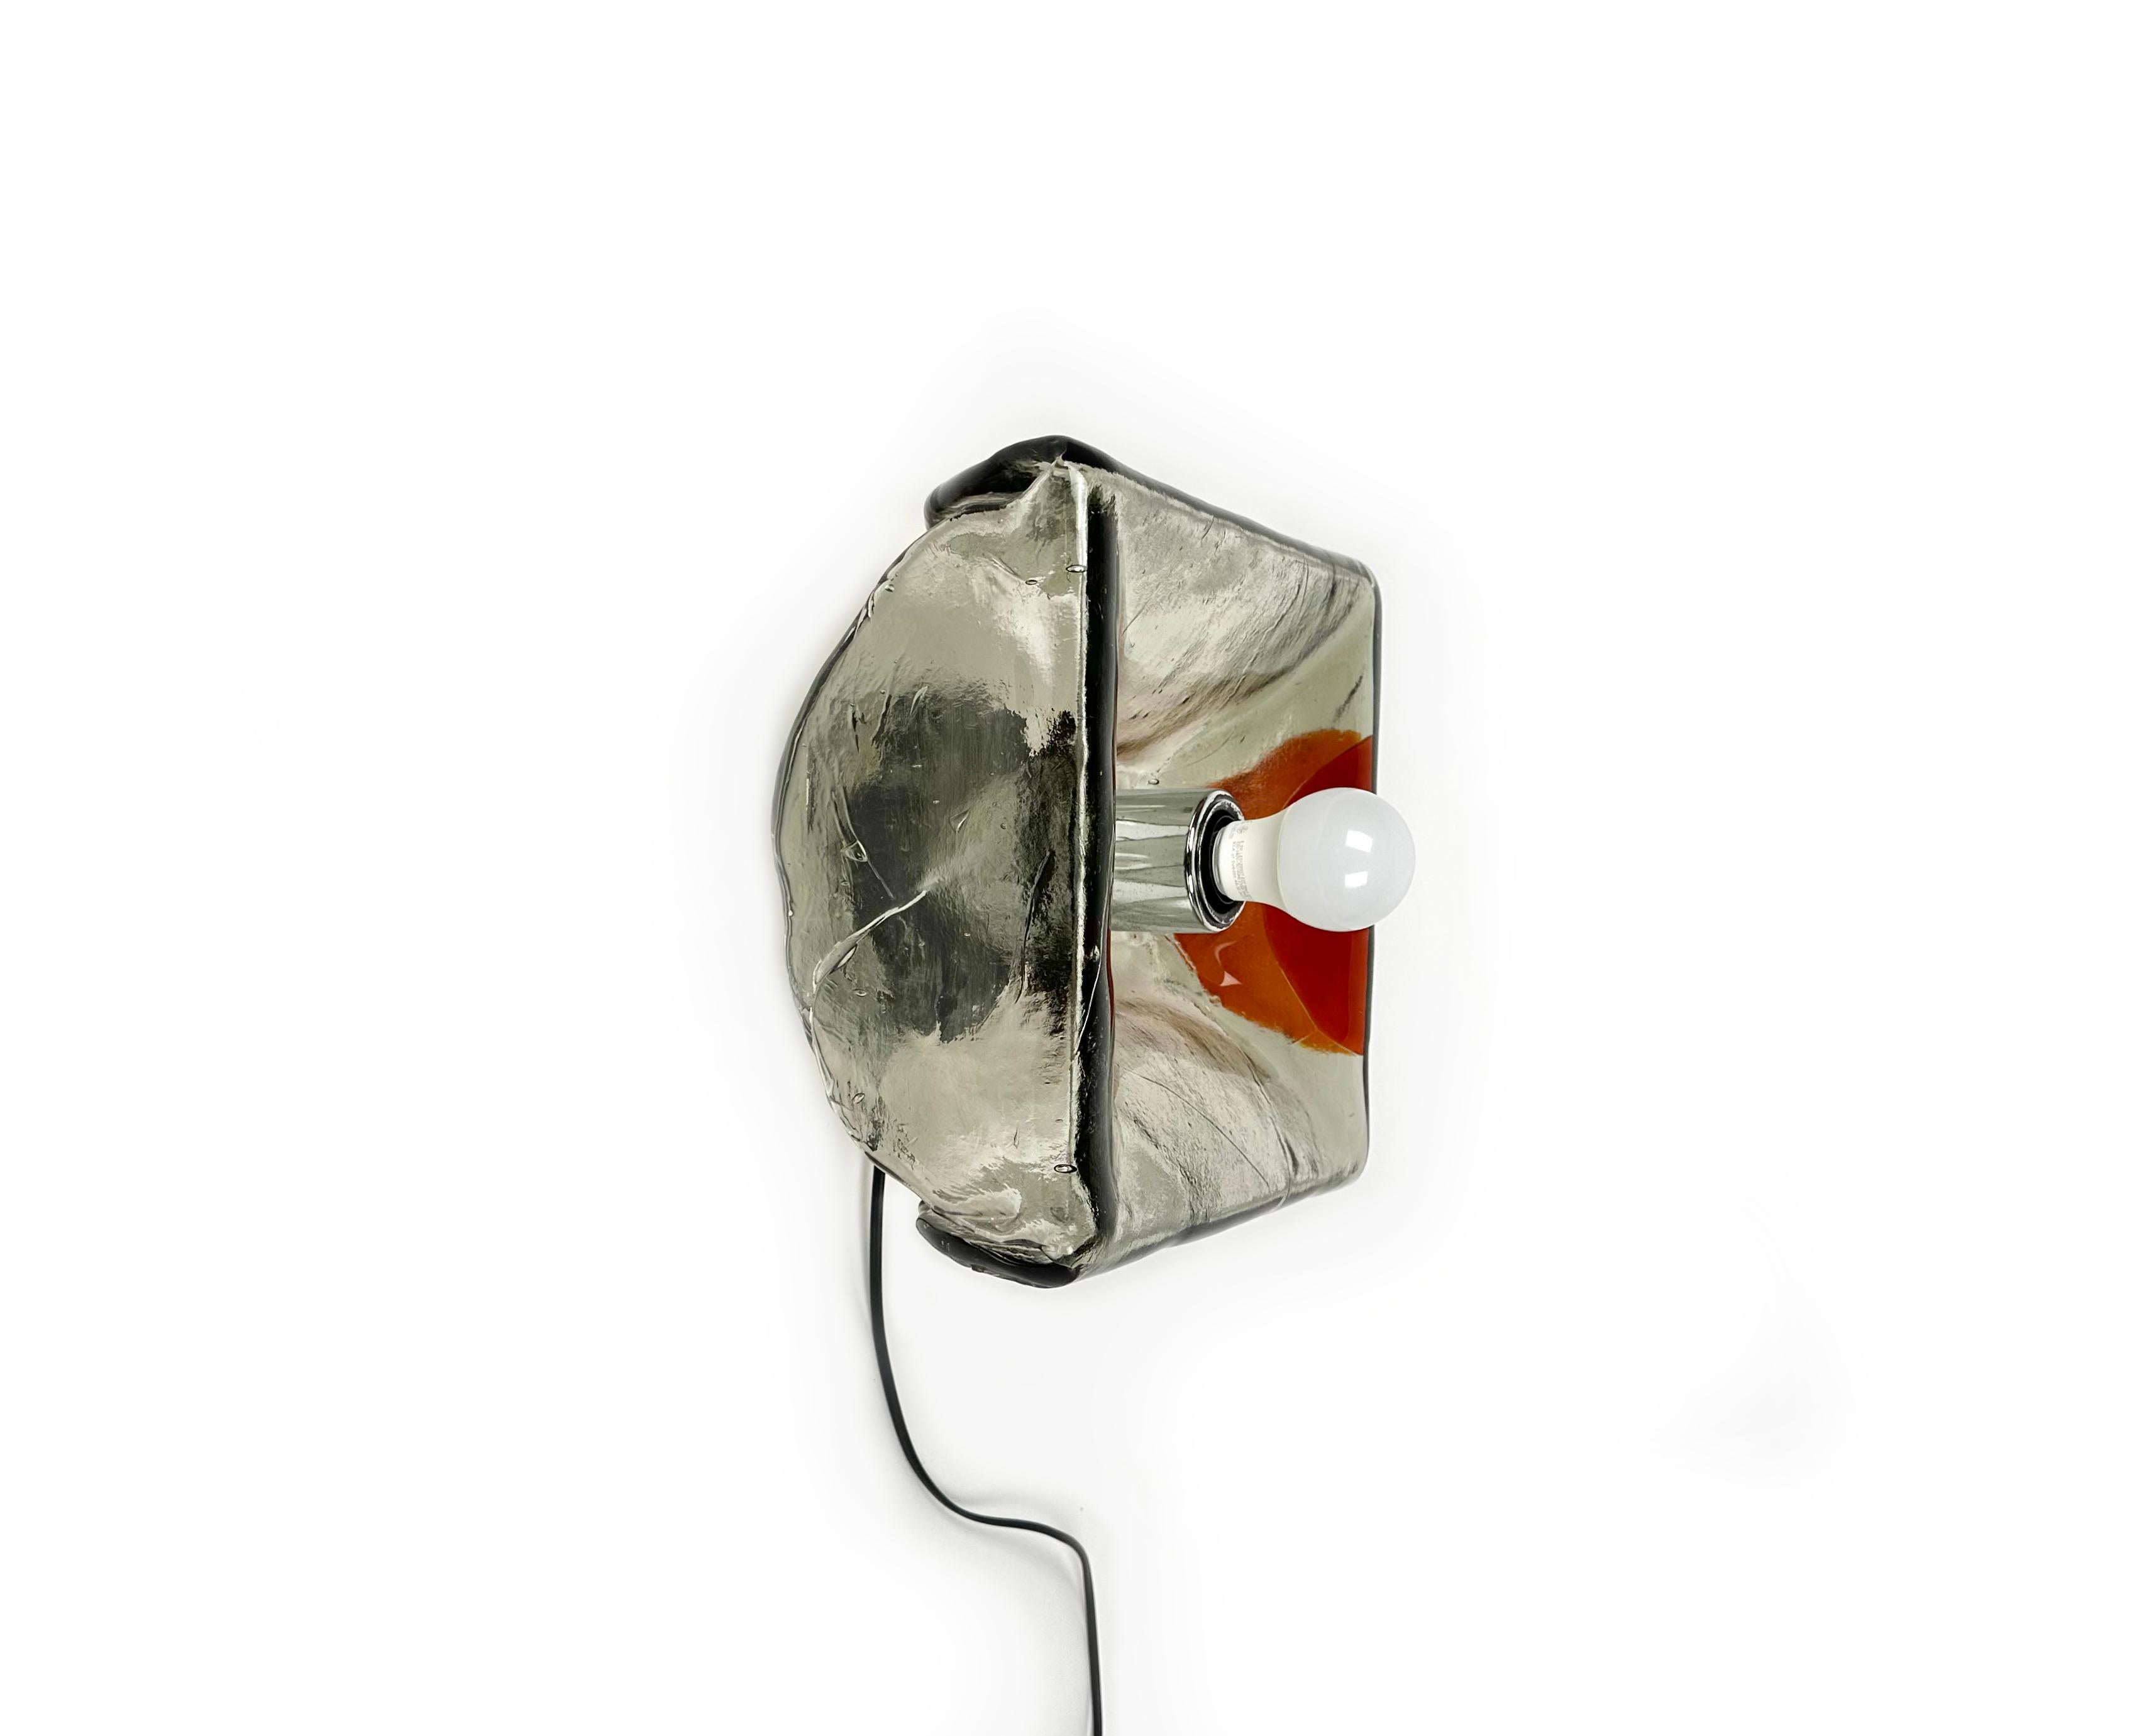 Metal Midcentury Sconce Wall Lamp in Murano Glass by Carlo Nason, Italy 1970s For Sale